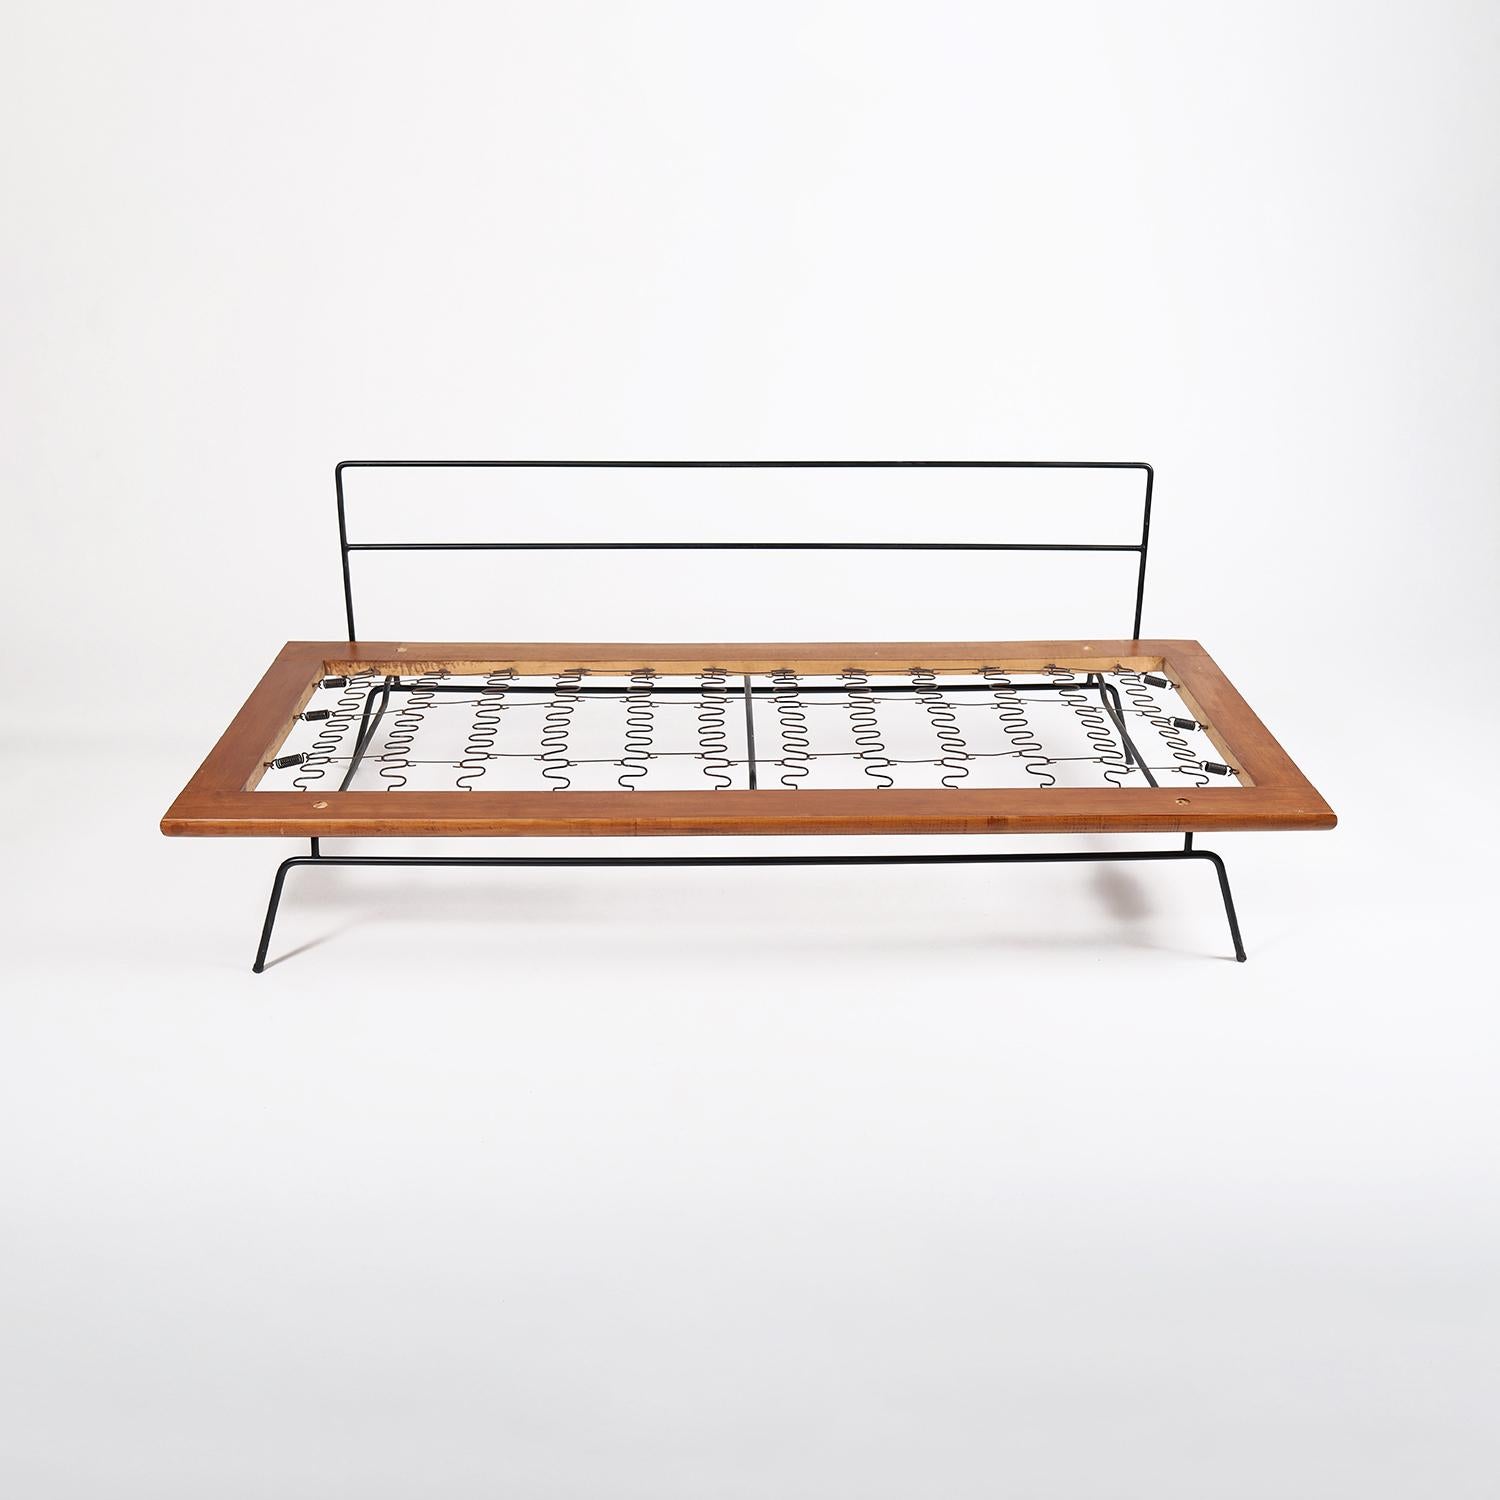 A classic California Modern iron and wood day bed designed by Clifford Pascoe. Original vinyl upholstery. 


Professional, skilled furniture restoration is an integral part of what we do every day. Our goal is to provide beautiful, functional